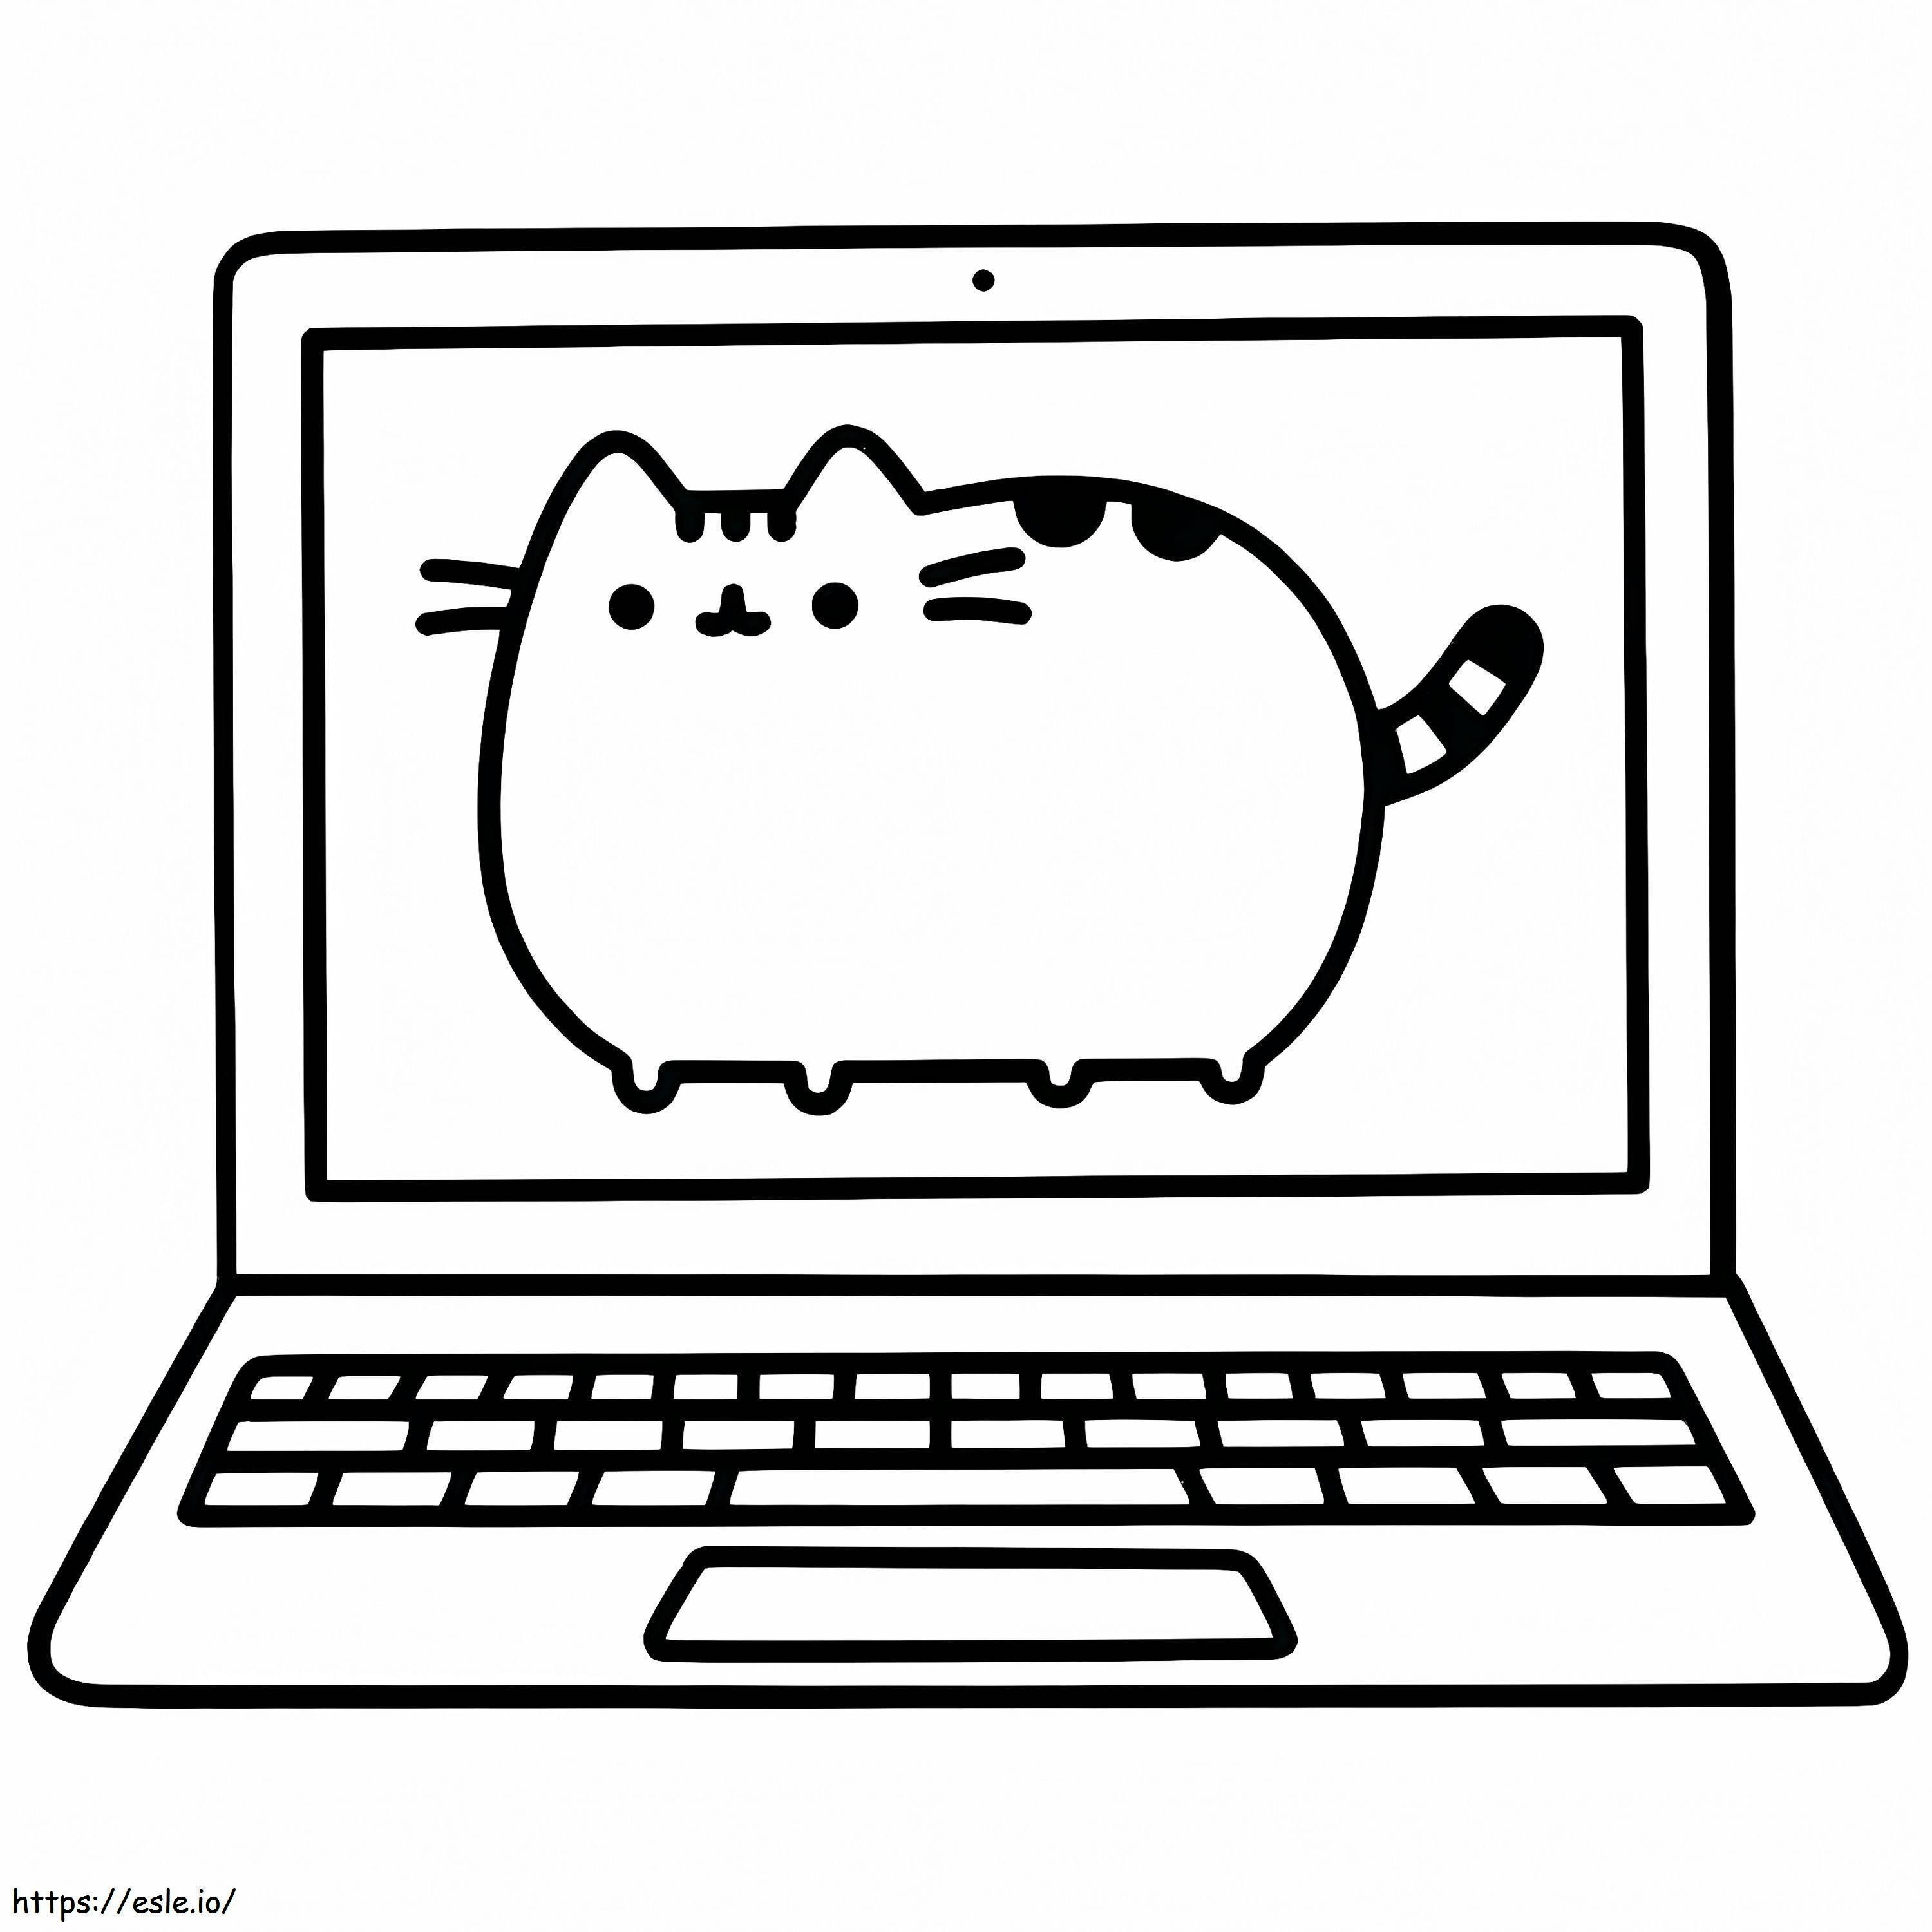 1541490741 Pusheen The Cat and Cat Coloring Pictures Pages Good and Books A The Kitty Unicorn for Kids Cat Cute For Make Perfect Pusheen Cat Printable 373 ぬりえ - 塗り絵